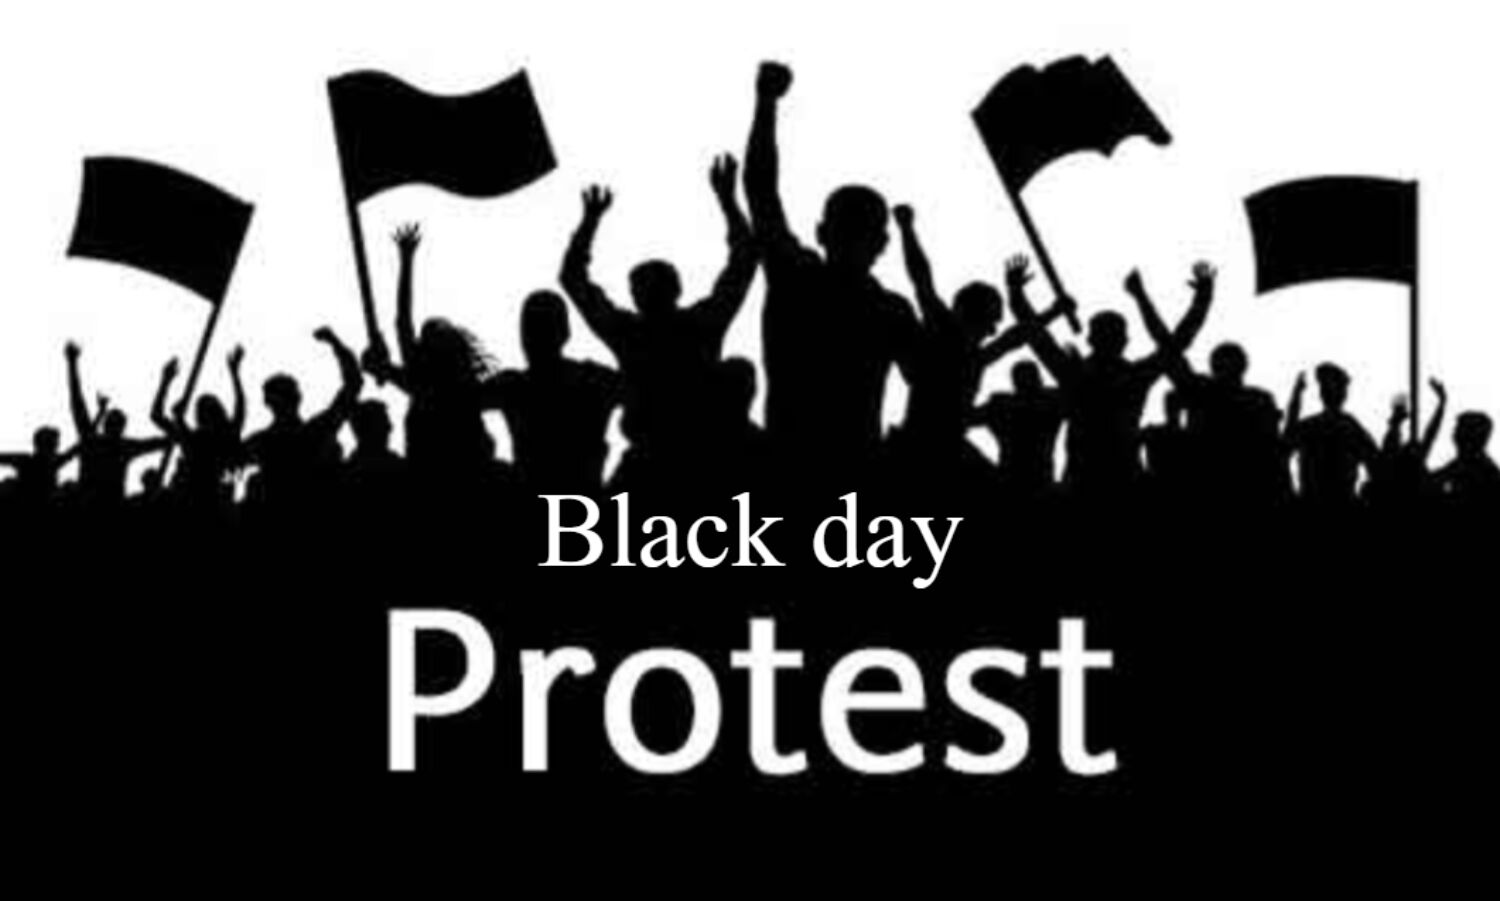 14 February Black Day of India Animation Video Ad Template Free Online  Video Advertise Maker - Videoad.in